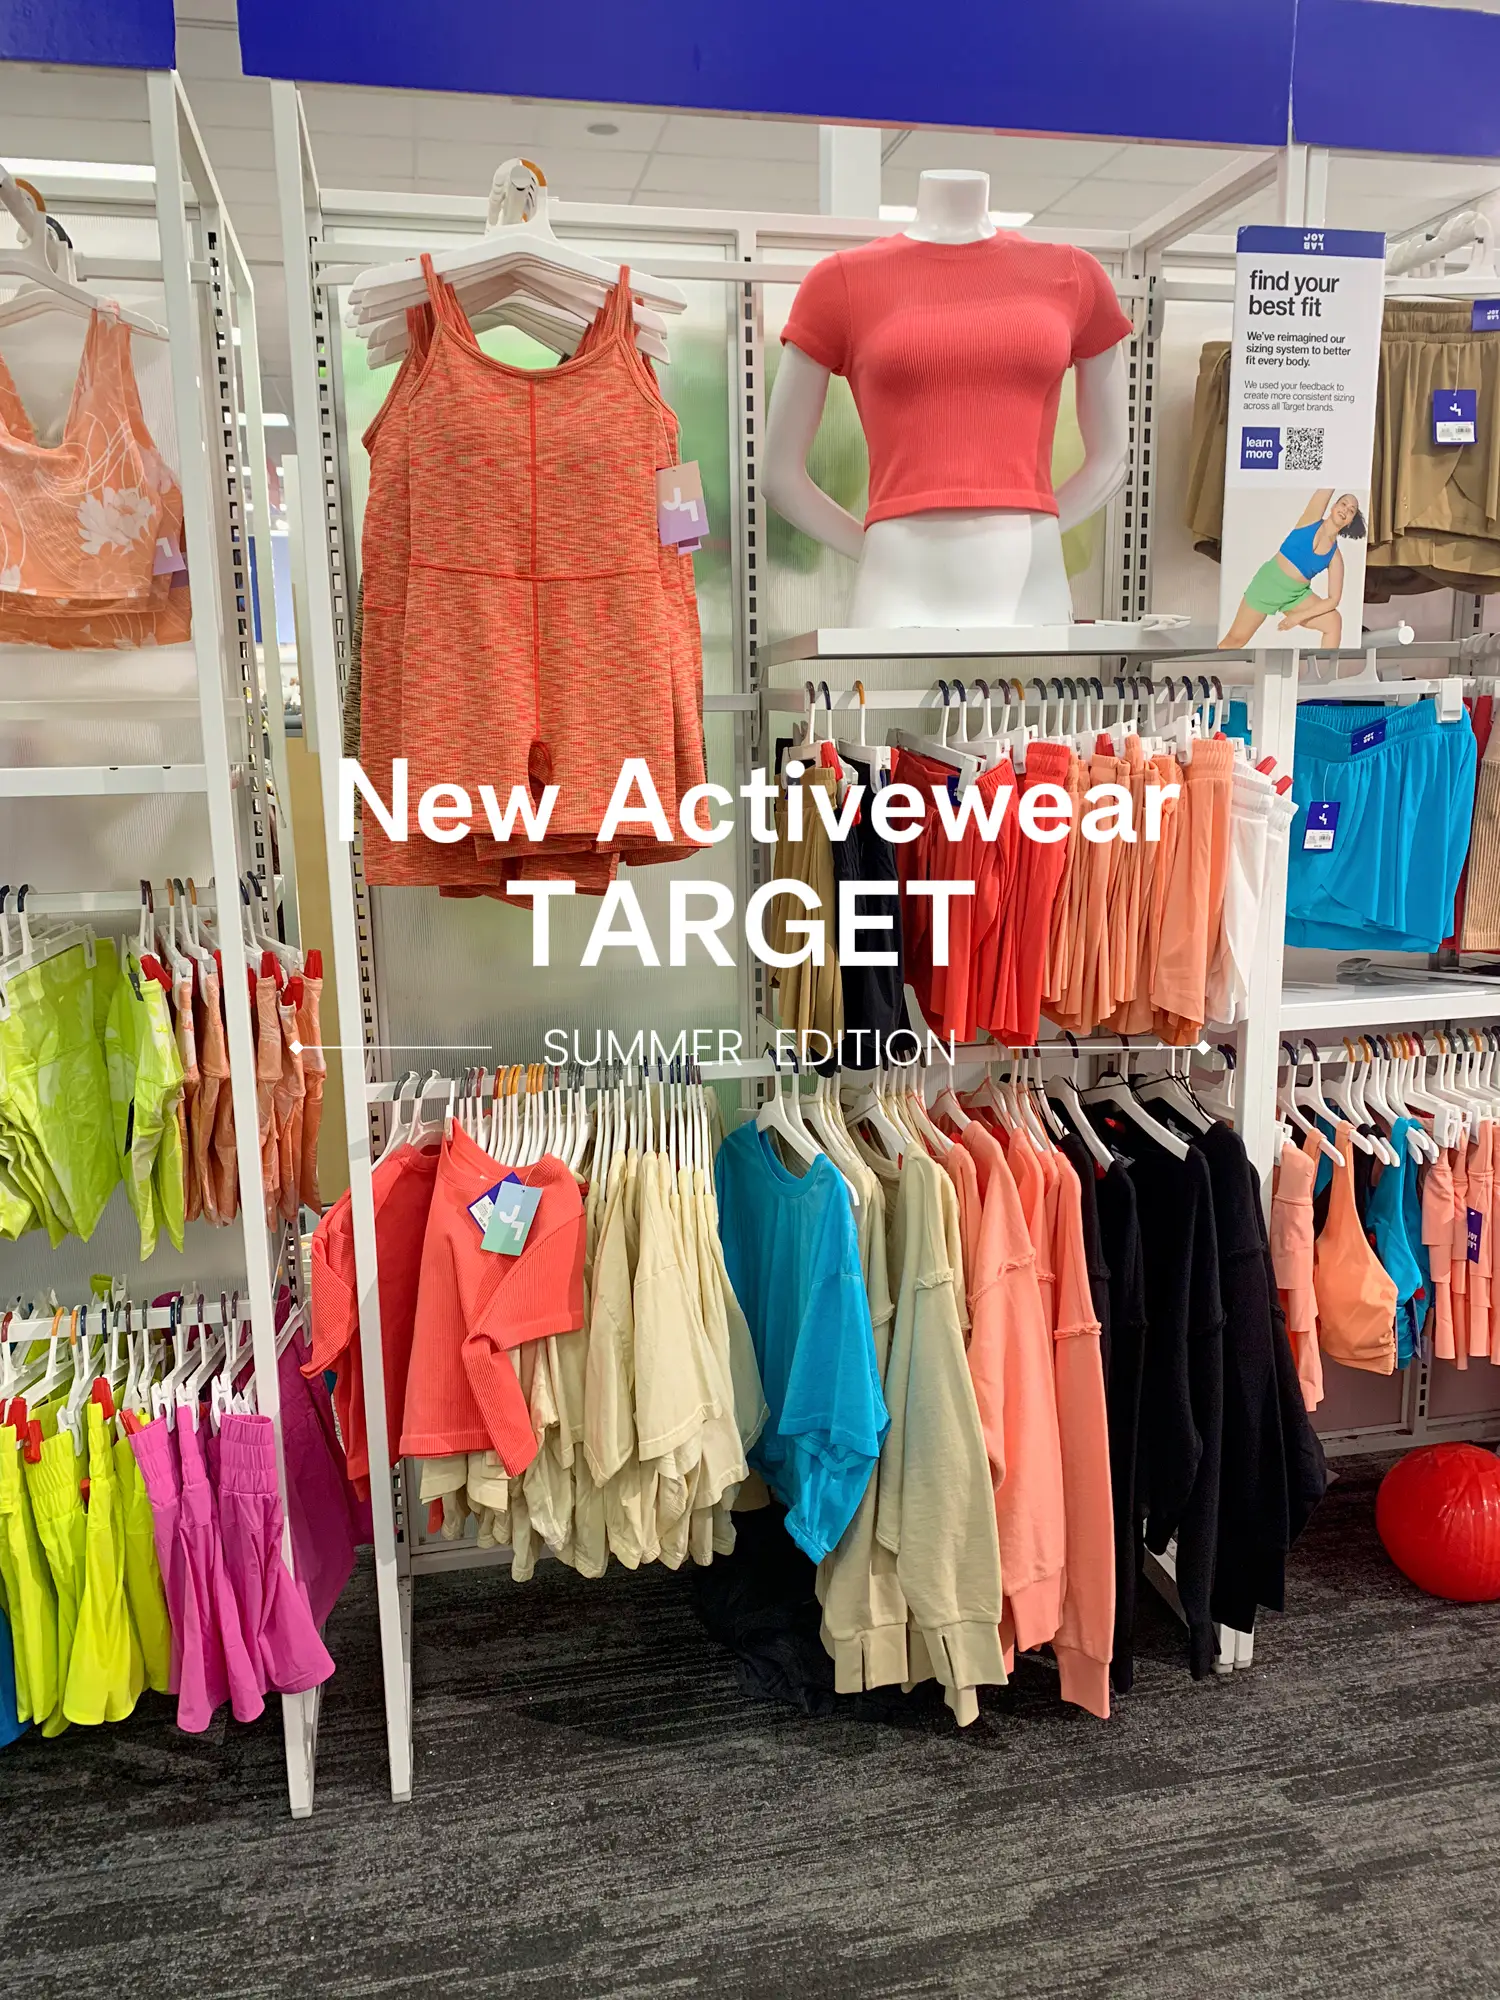 colsie has the best basics and lounge!! #target #targetmusthaves #targ